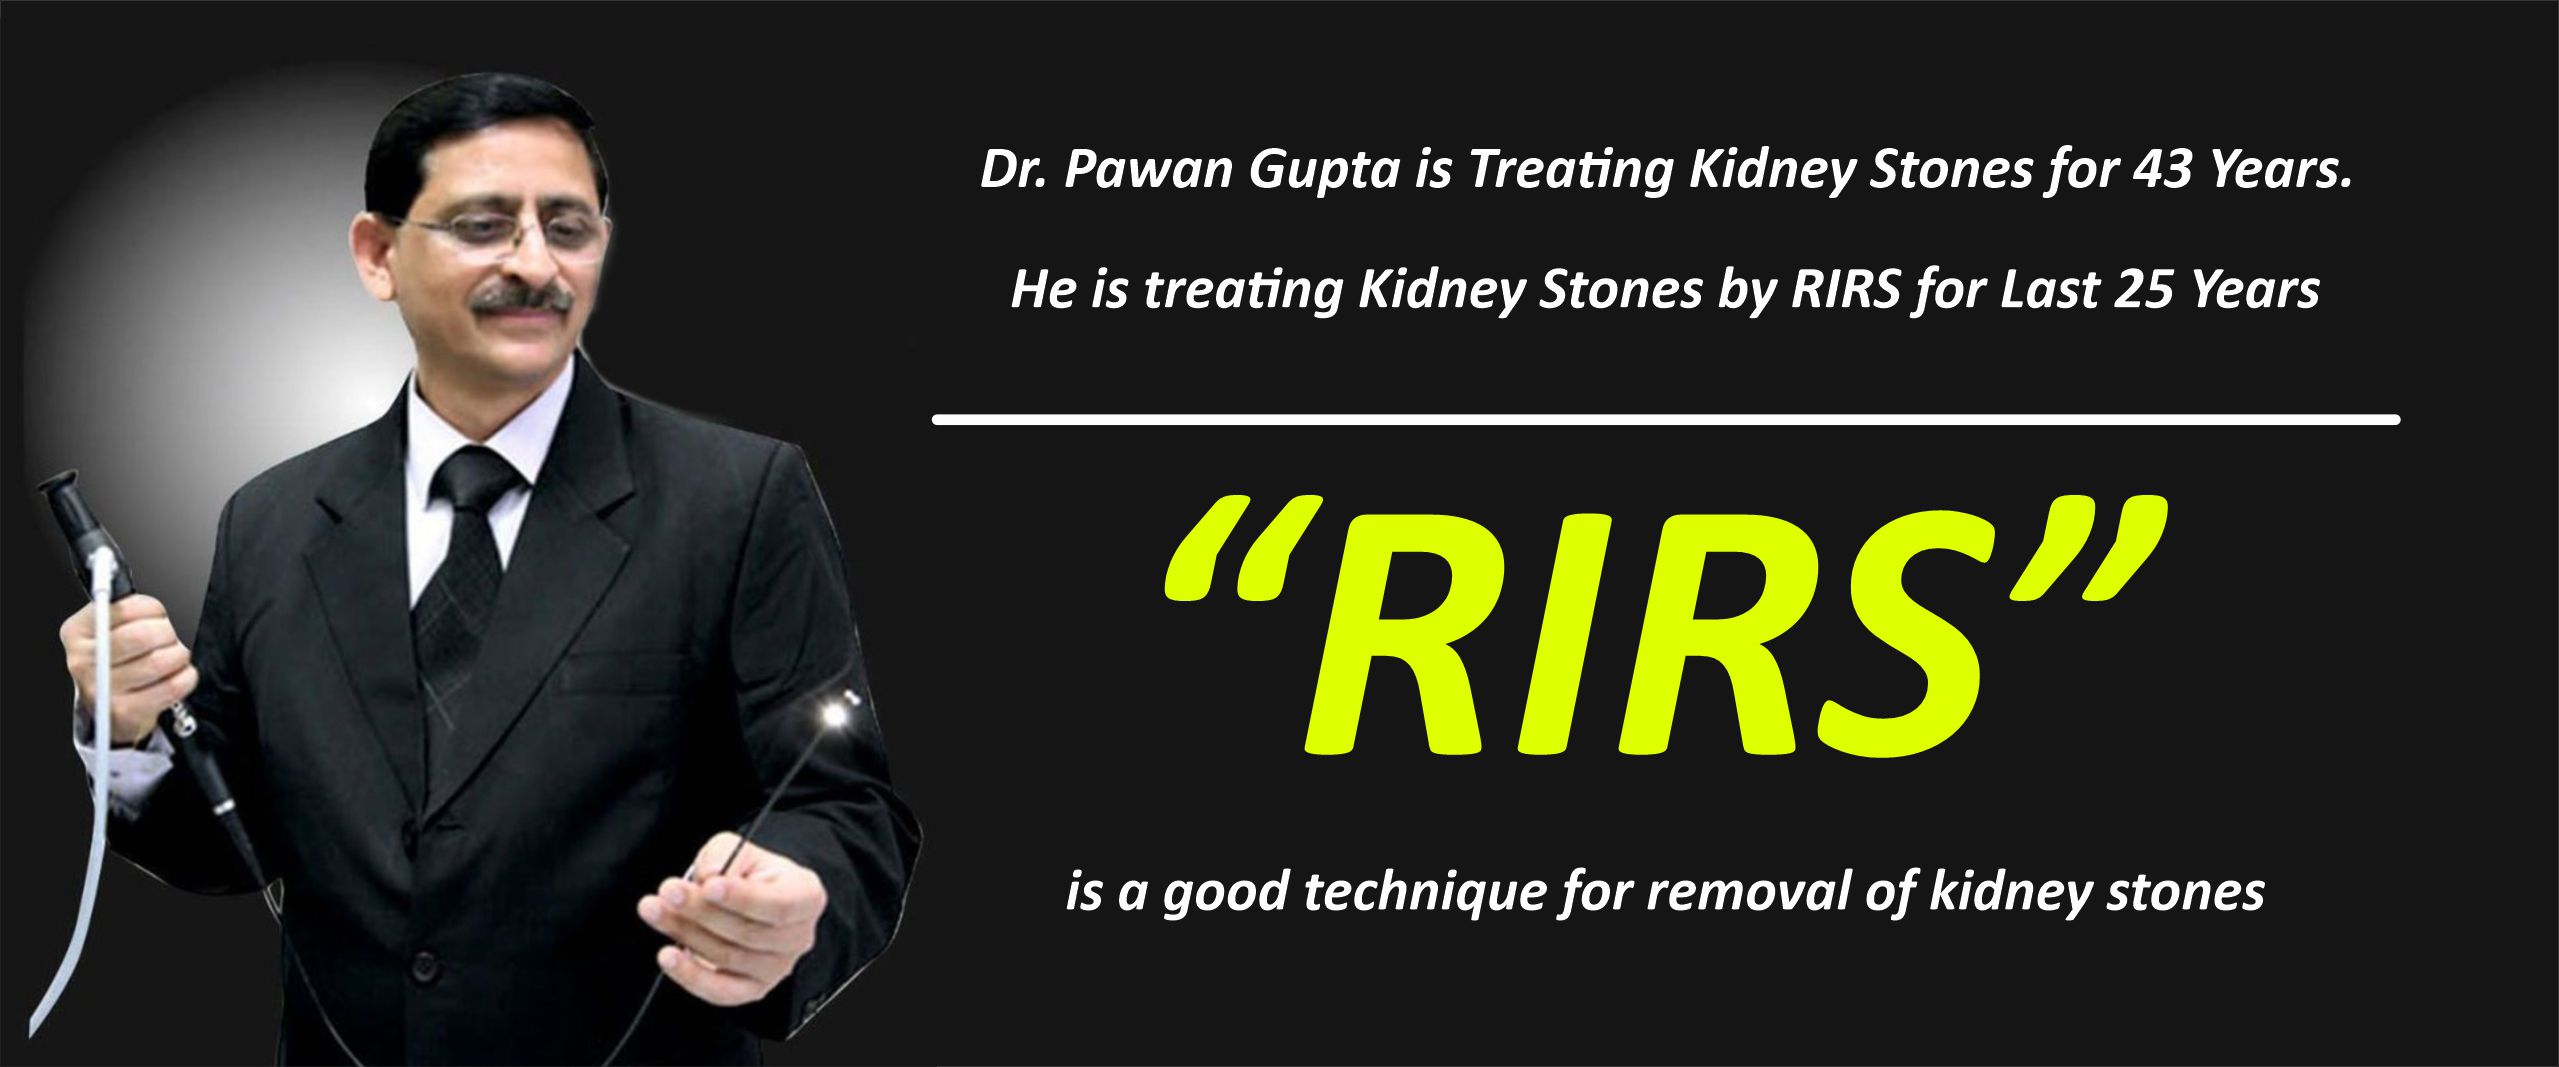 RIRS-is-a-good-technique-for-removal-of-kidney-stones